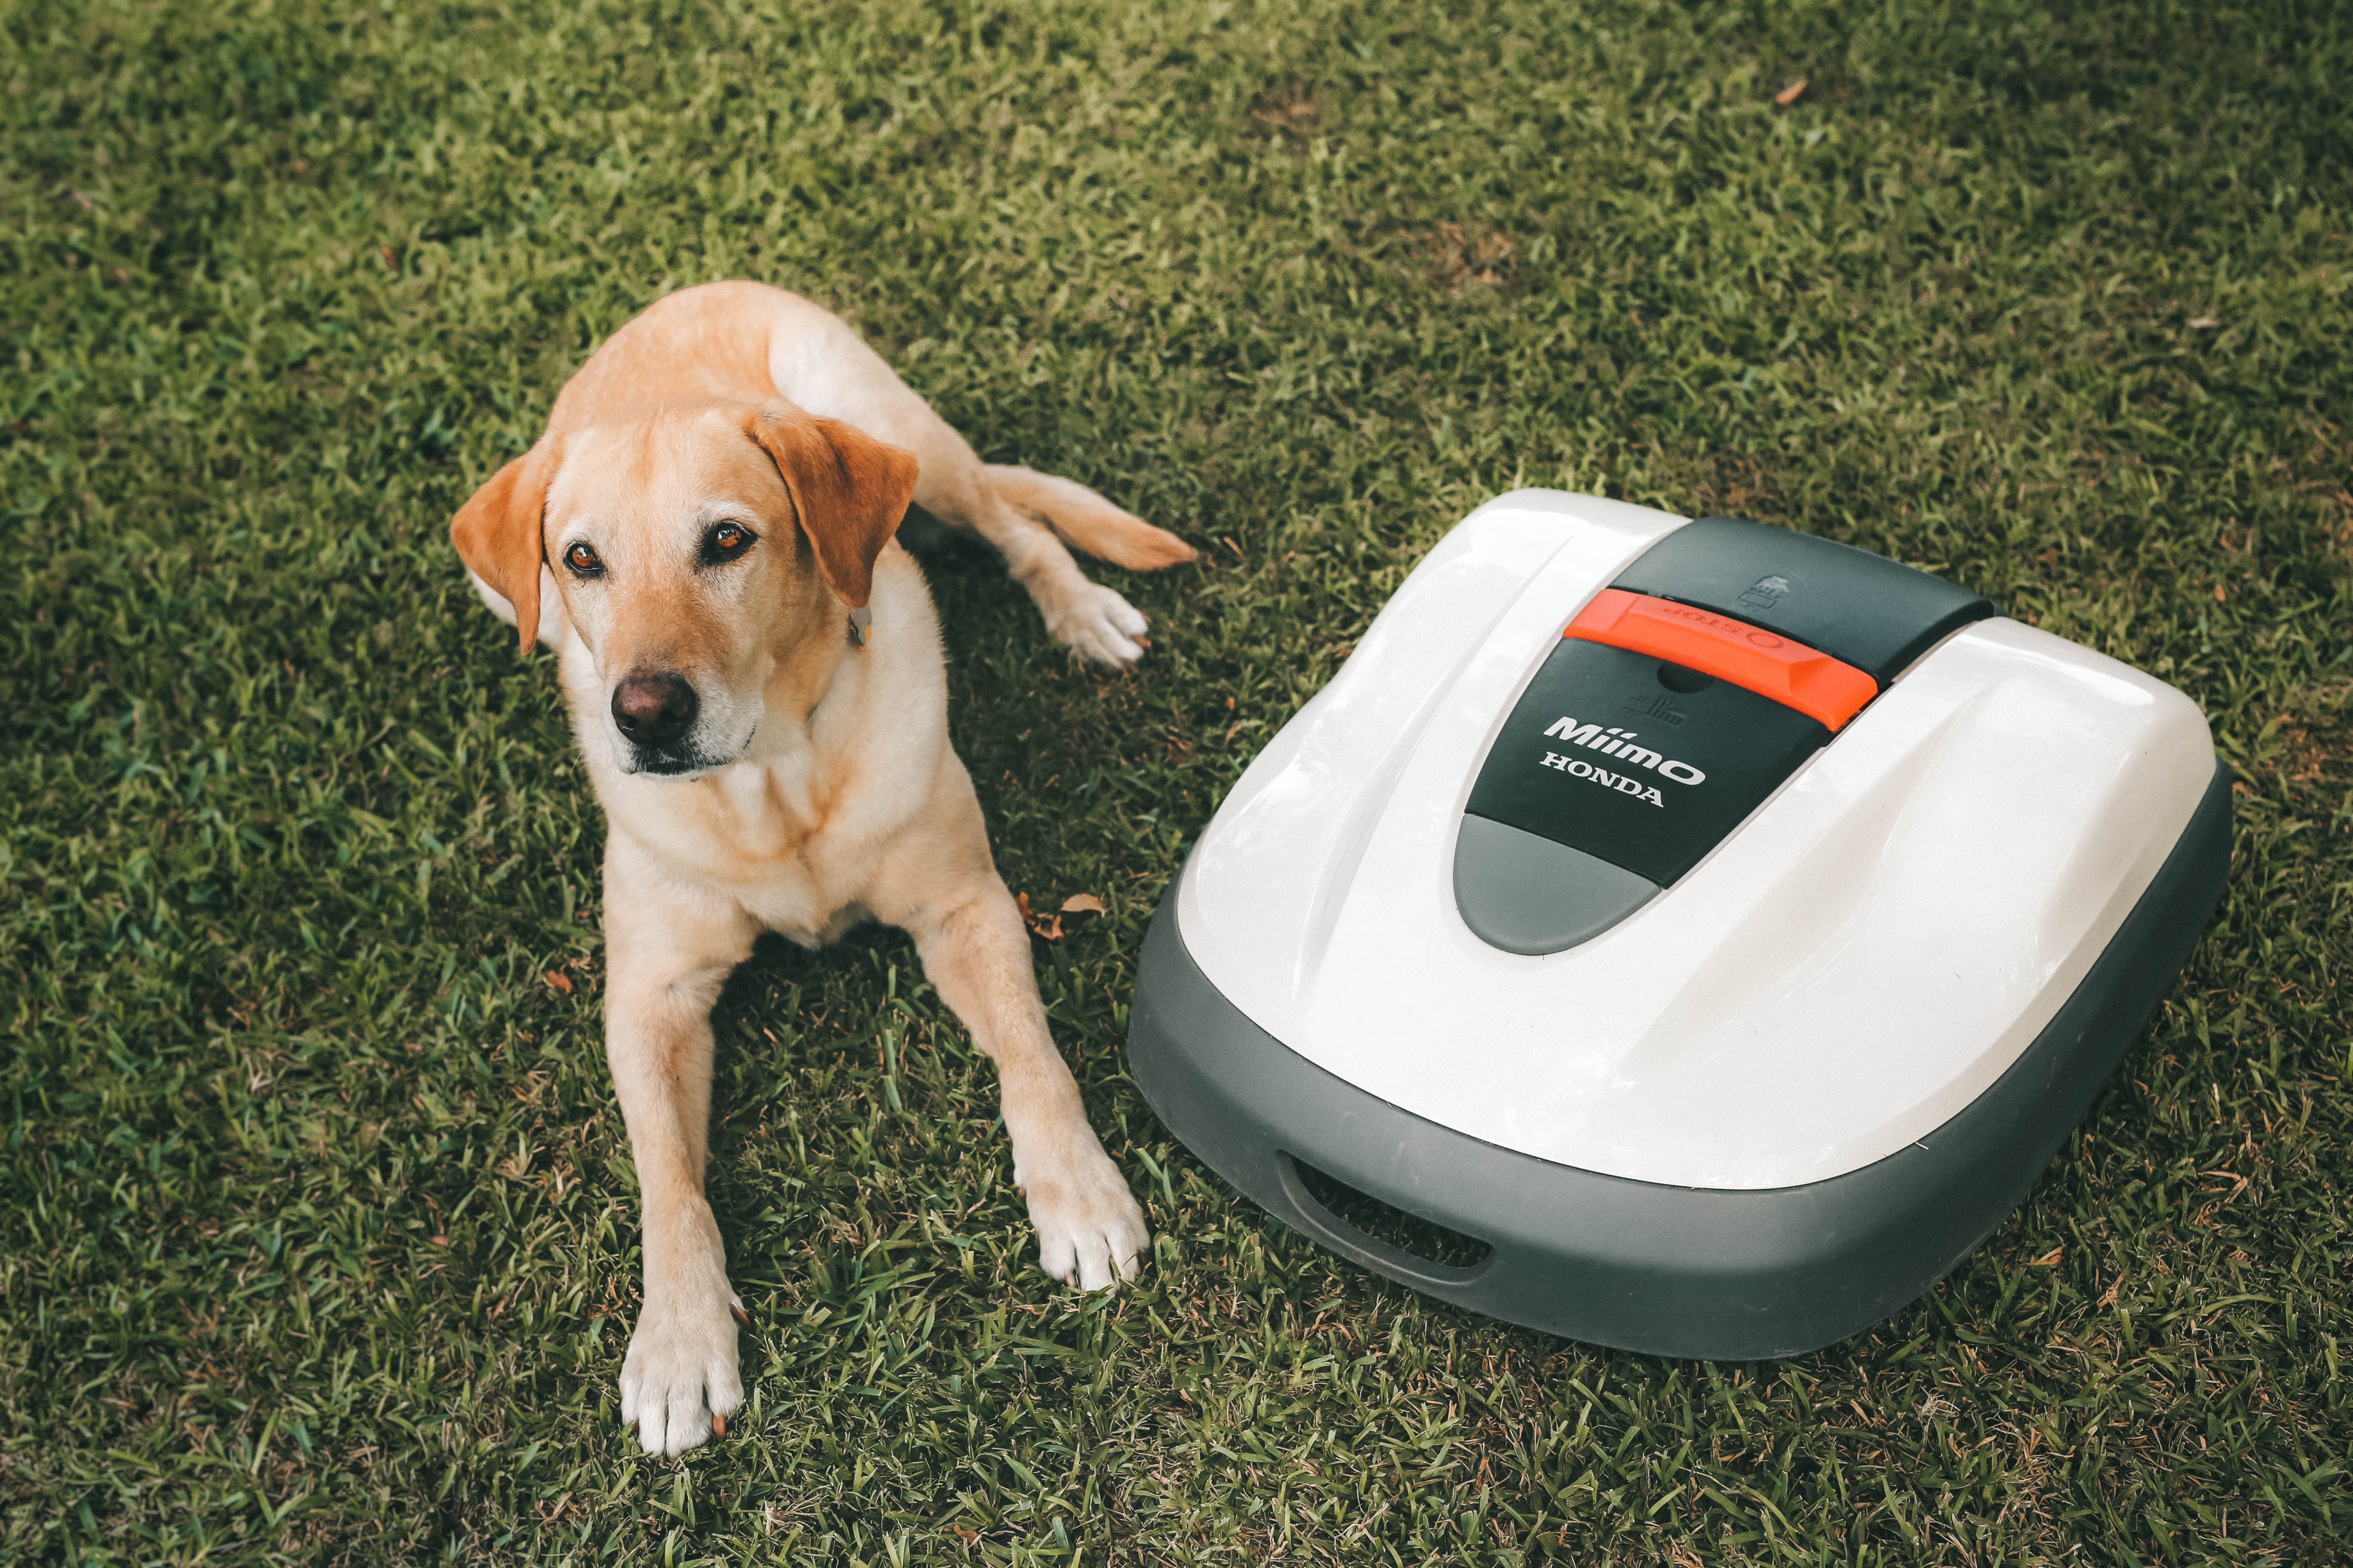 Honda Miimo Robotic Lawn Mower Review by popular Austin lifestyle blog, Dressed to Kill: image of a golden lab sitting next to a Honda Miimo Robotic Lawn Mower.